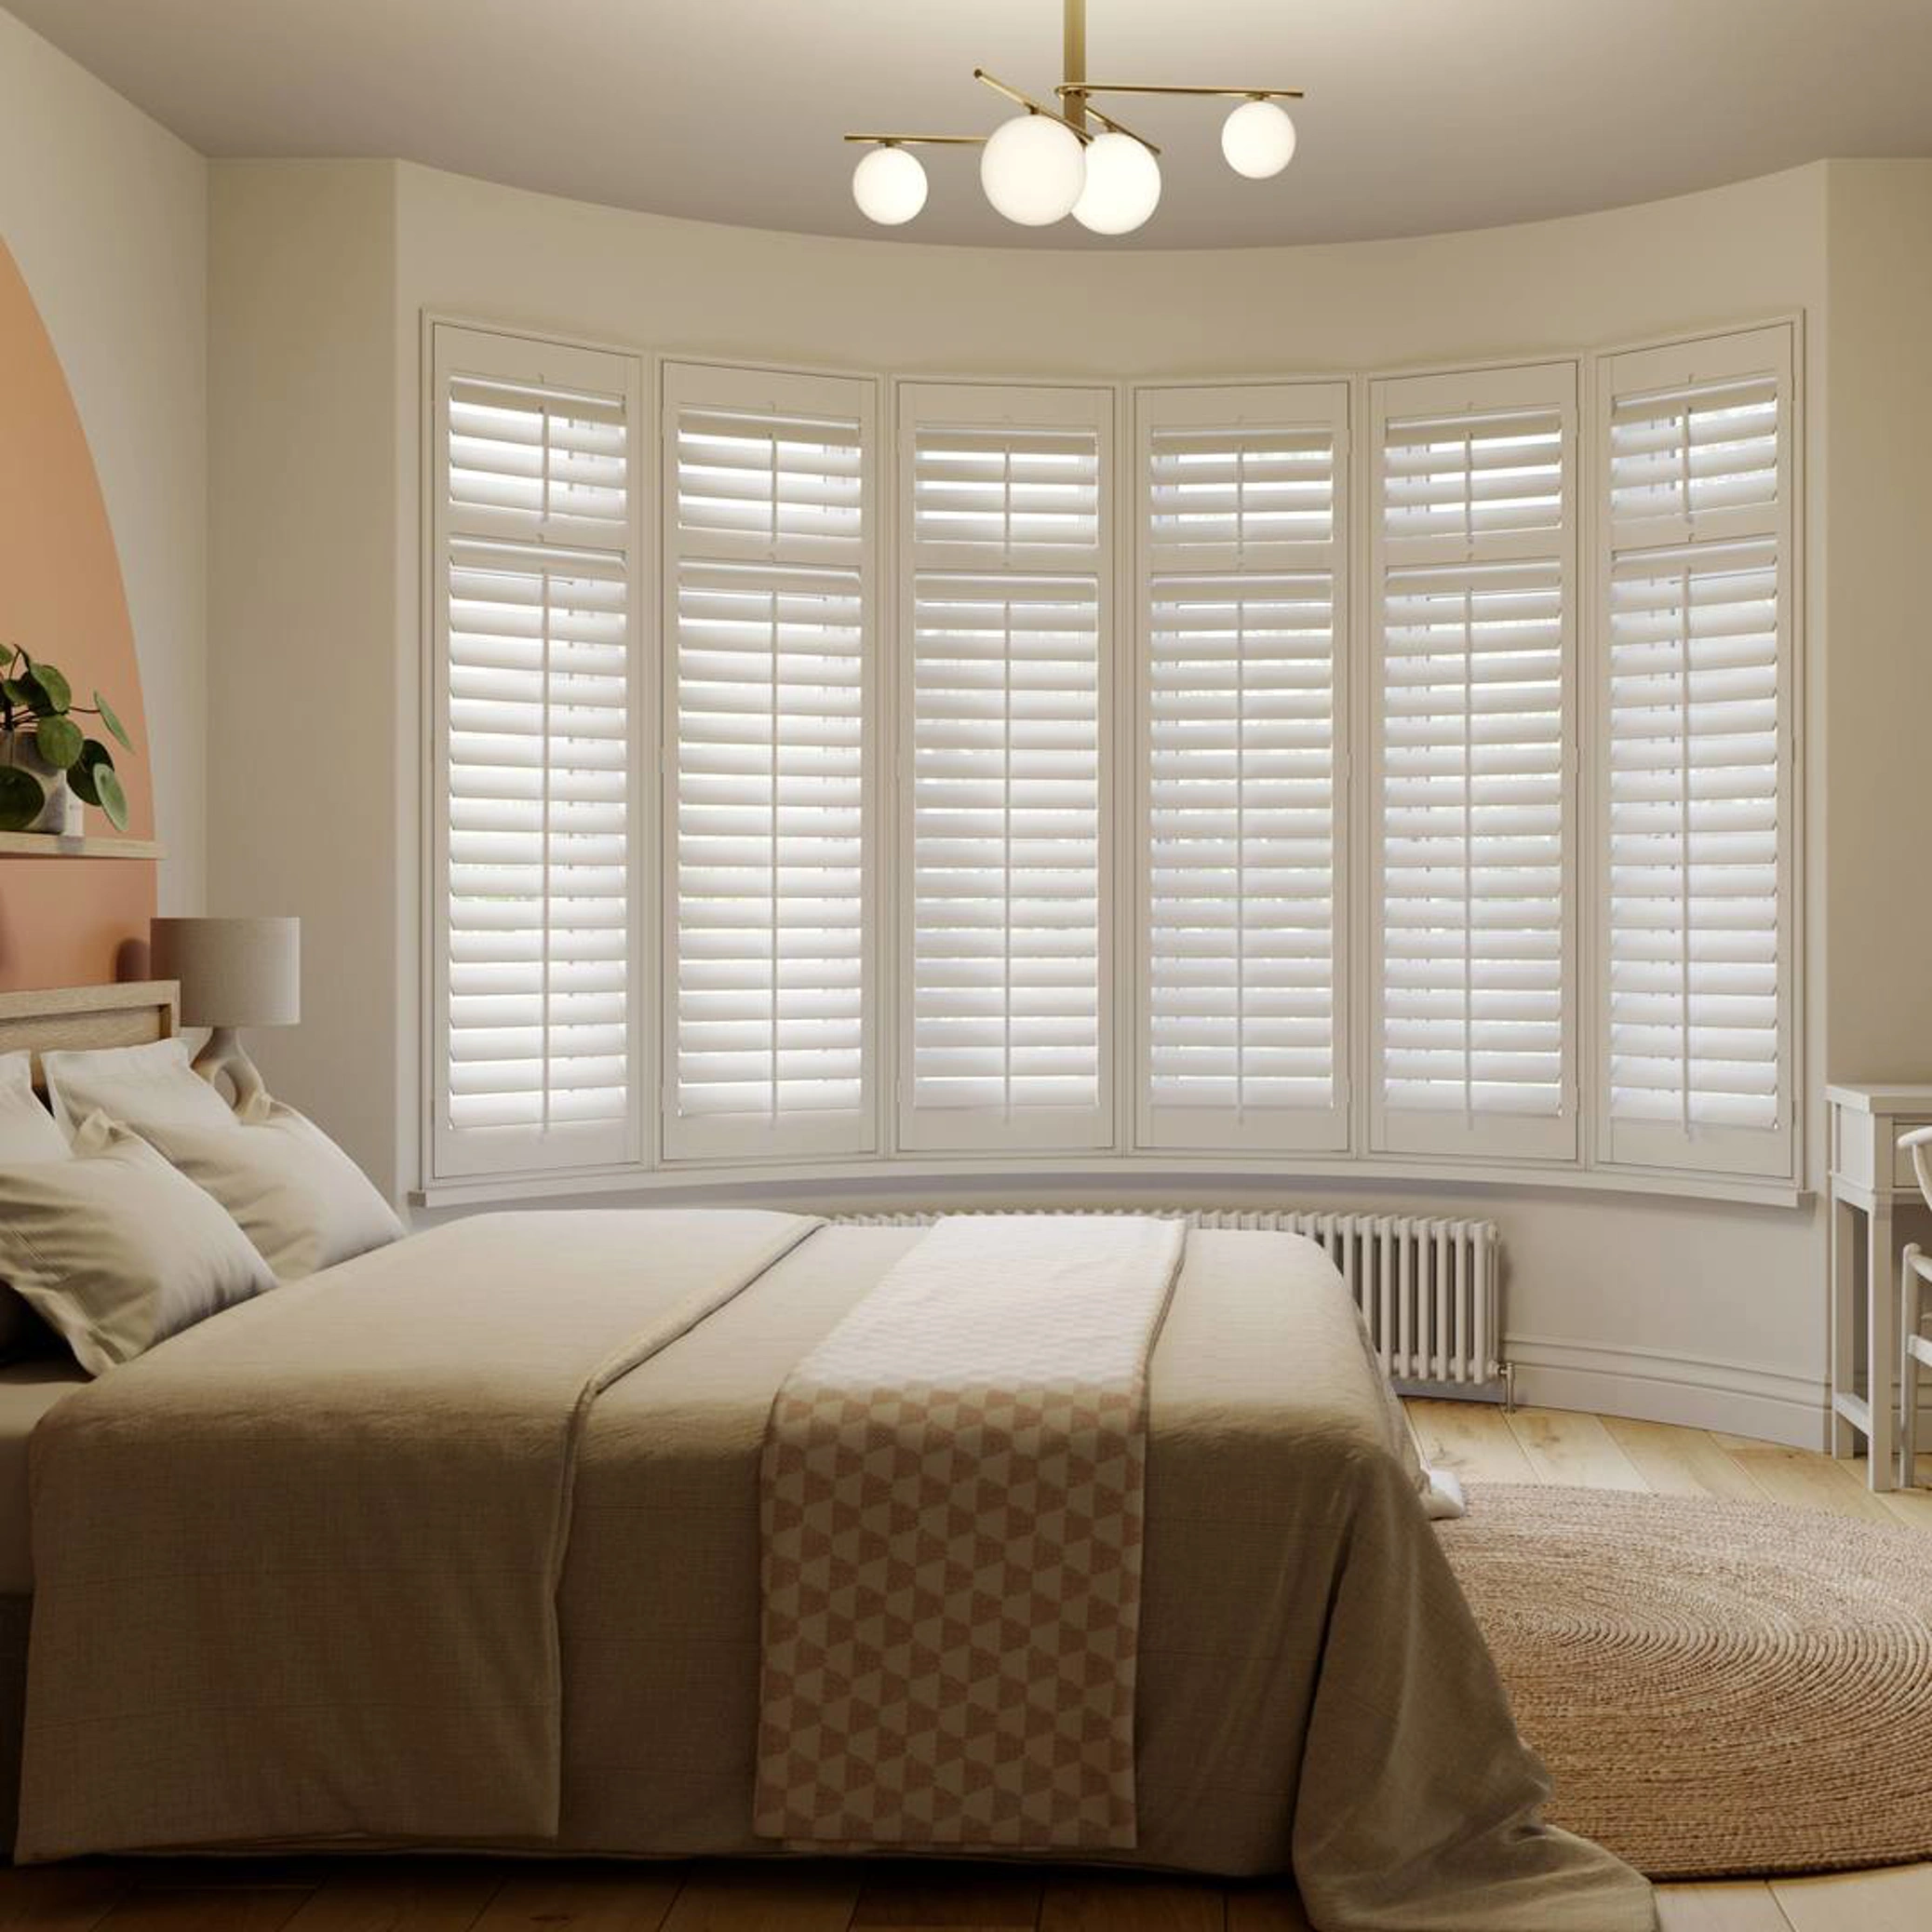 Vivid White full height wooden shutters in curved bay